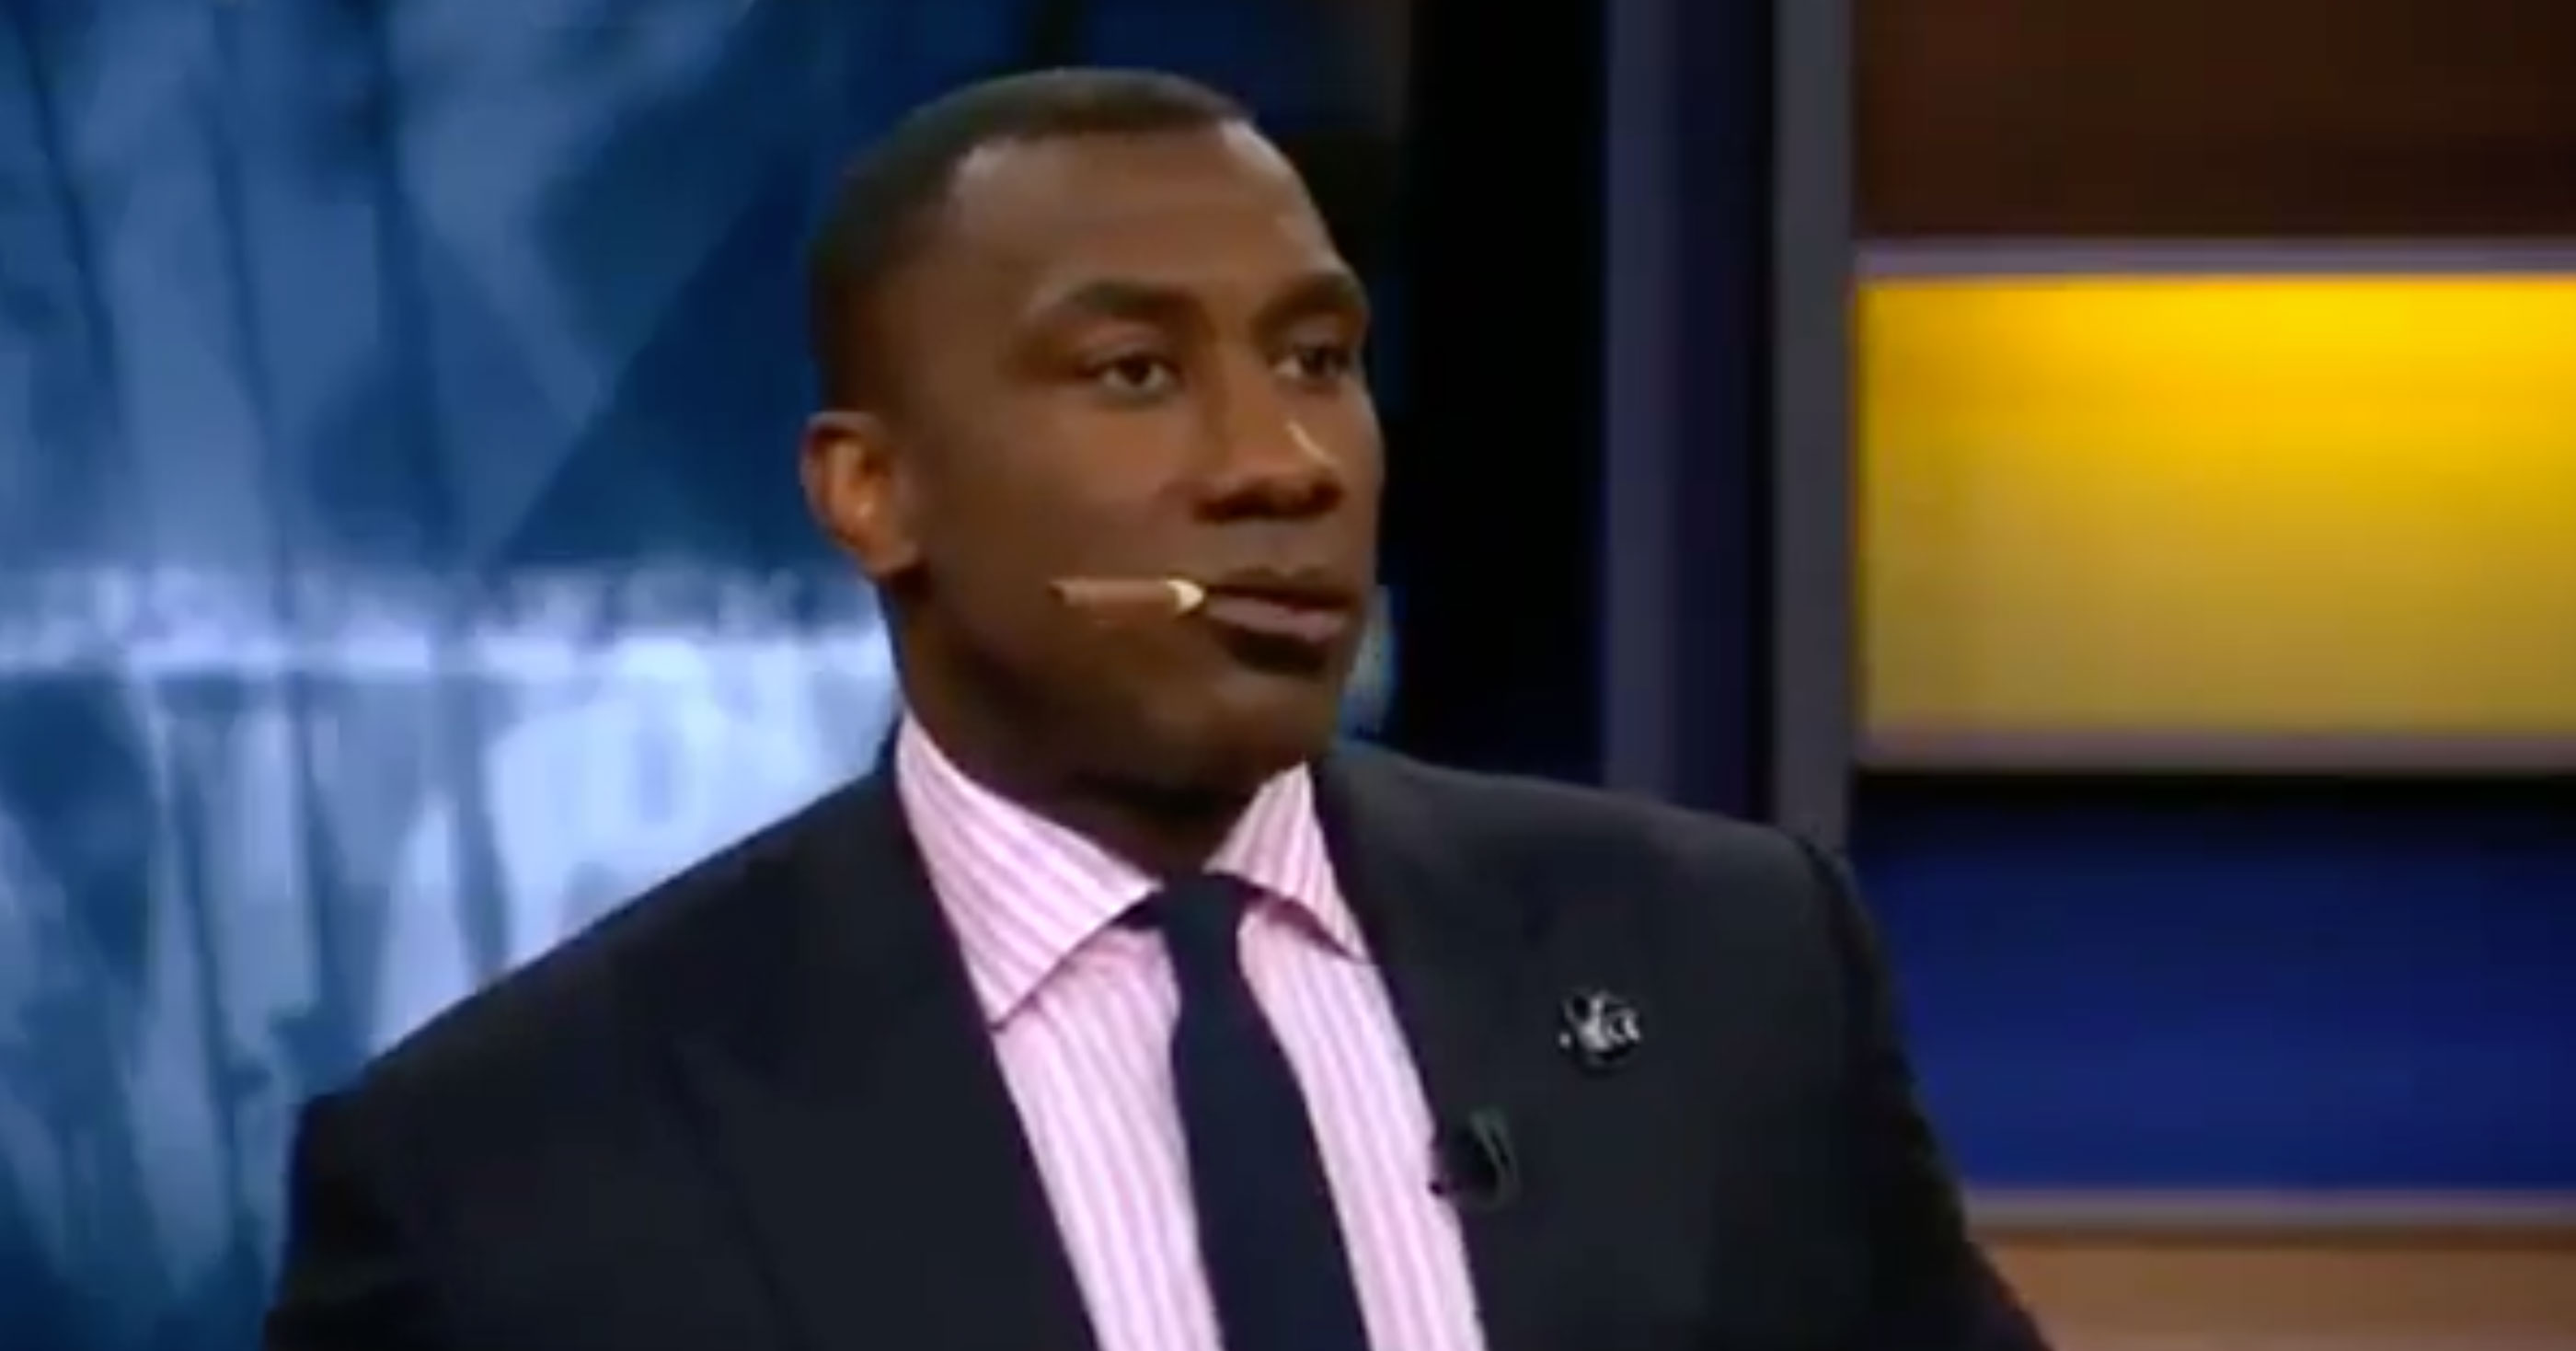 Undisputed's Shannon Sharpe Pulls Out A Black & Mild On Live TV While Arguing With ...2800 x 1468